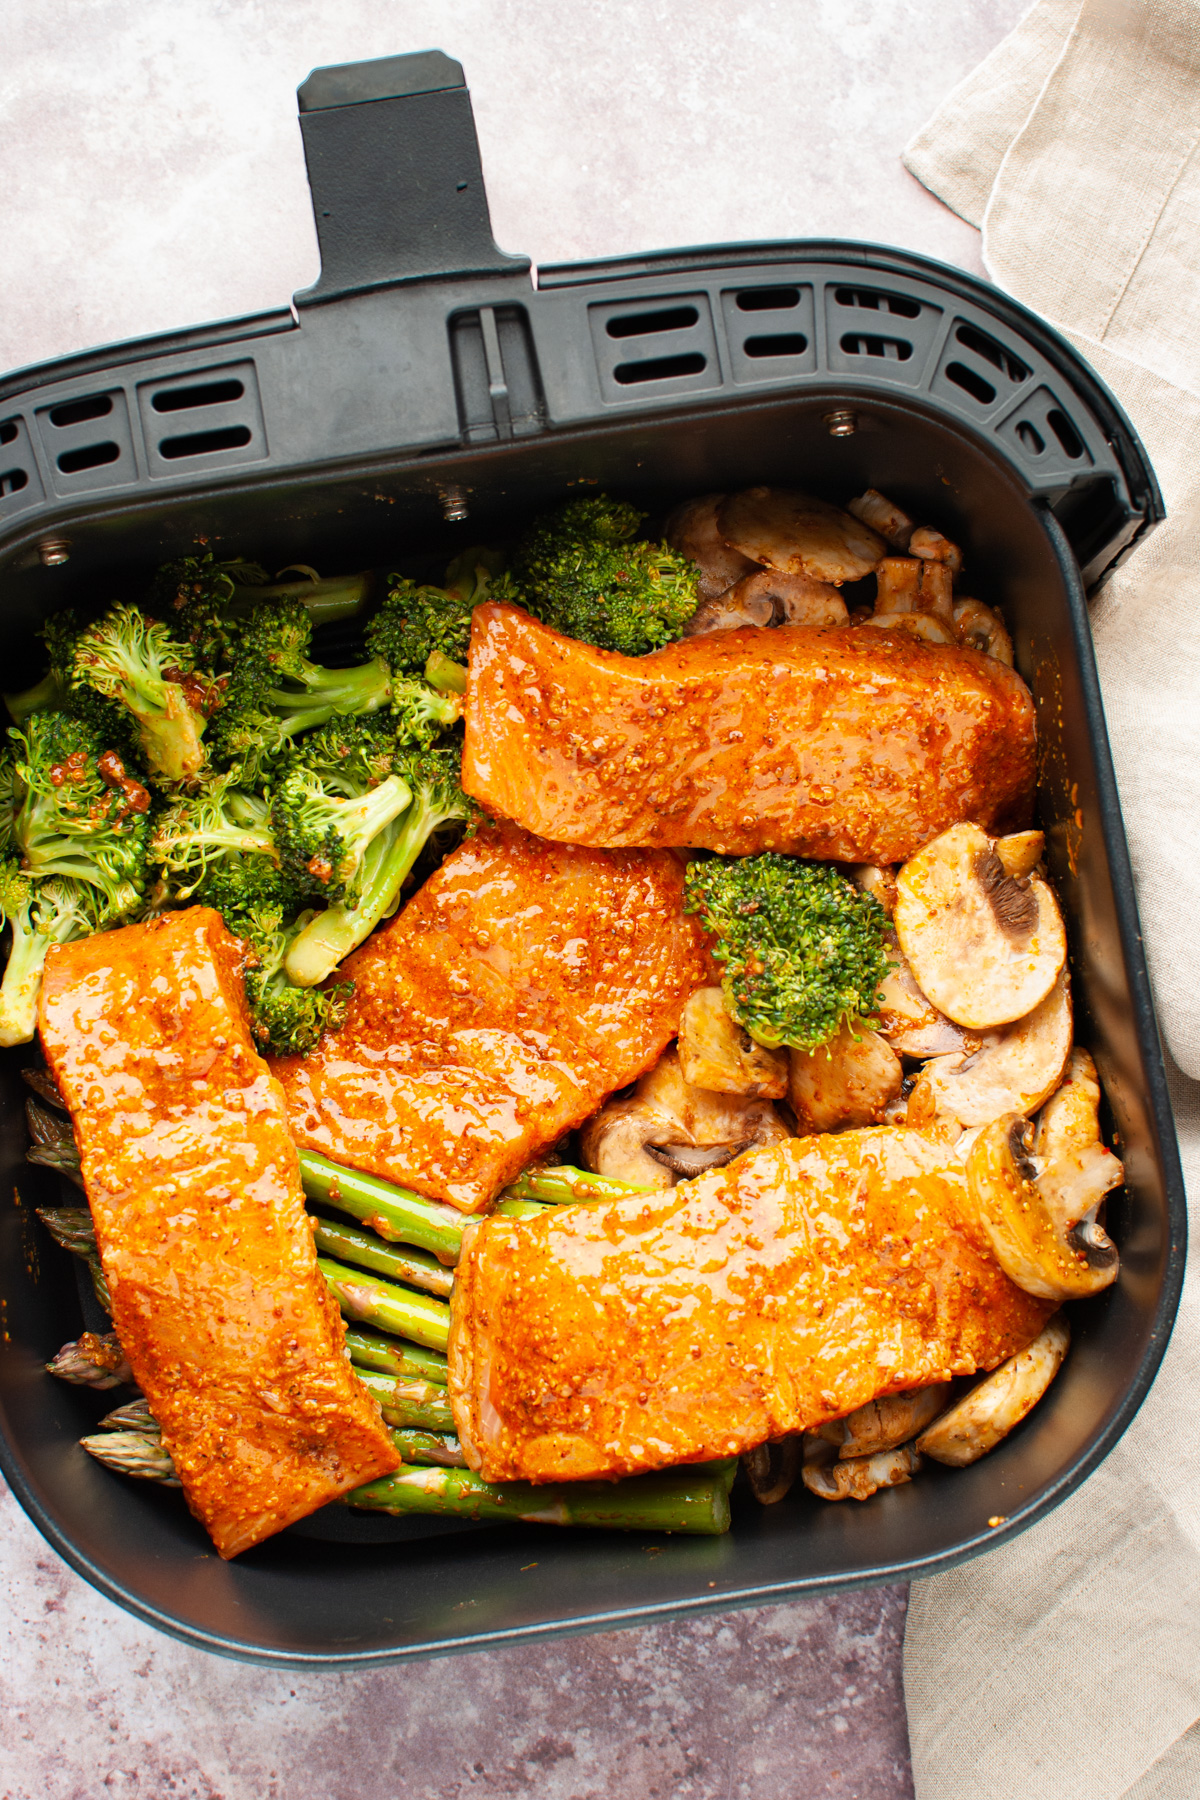 Salmon fillets and vegetables (asparagus, mushrooms, and broccoli in air fryer.